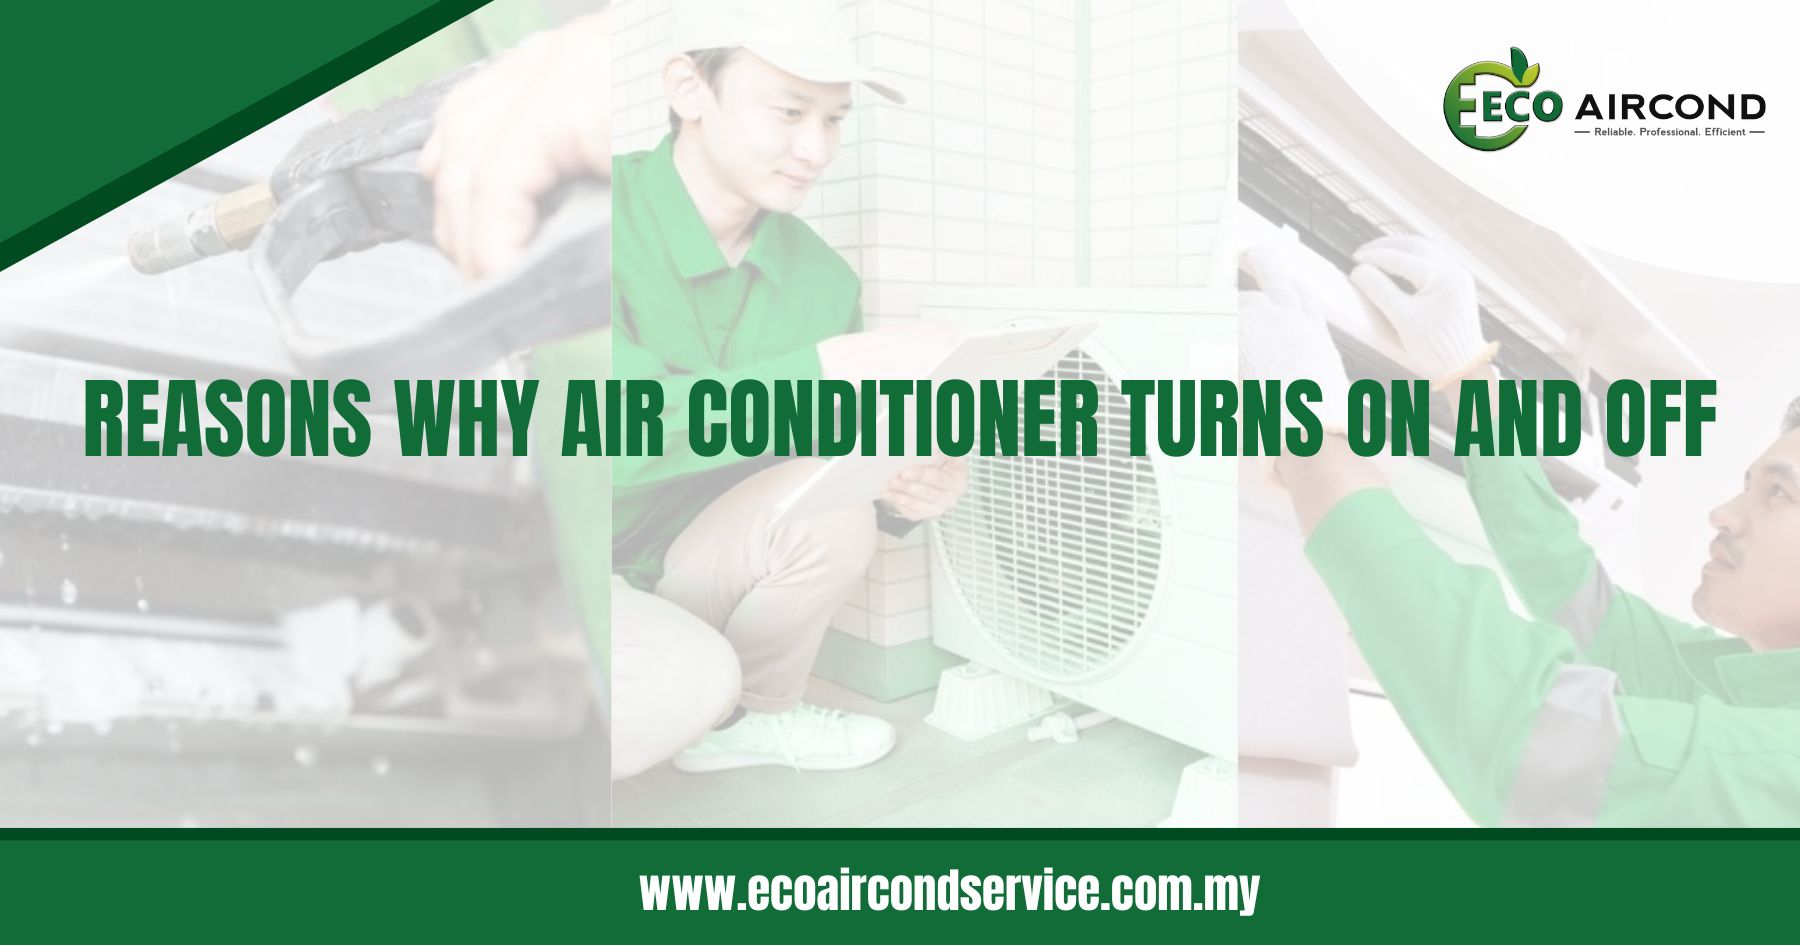 Reasons Why Air Conditioner Turns On and Off